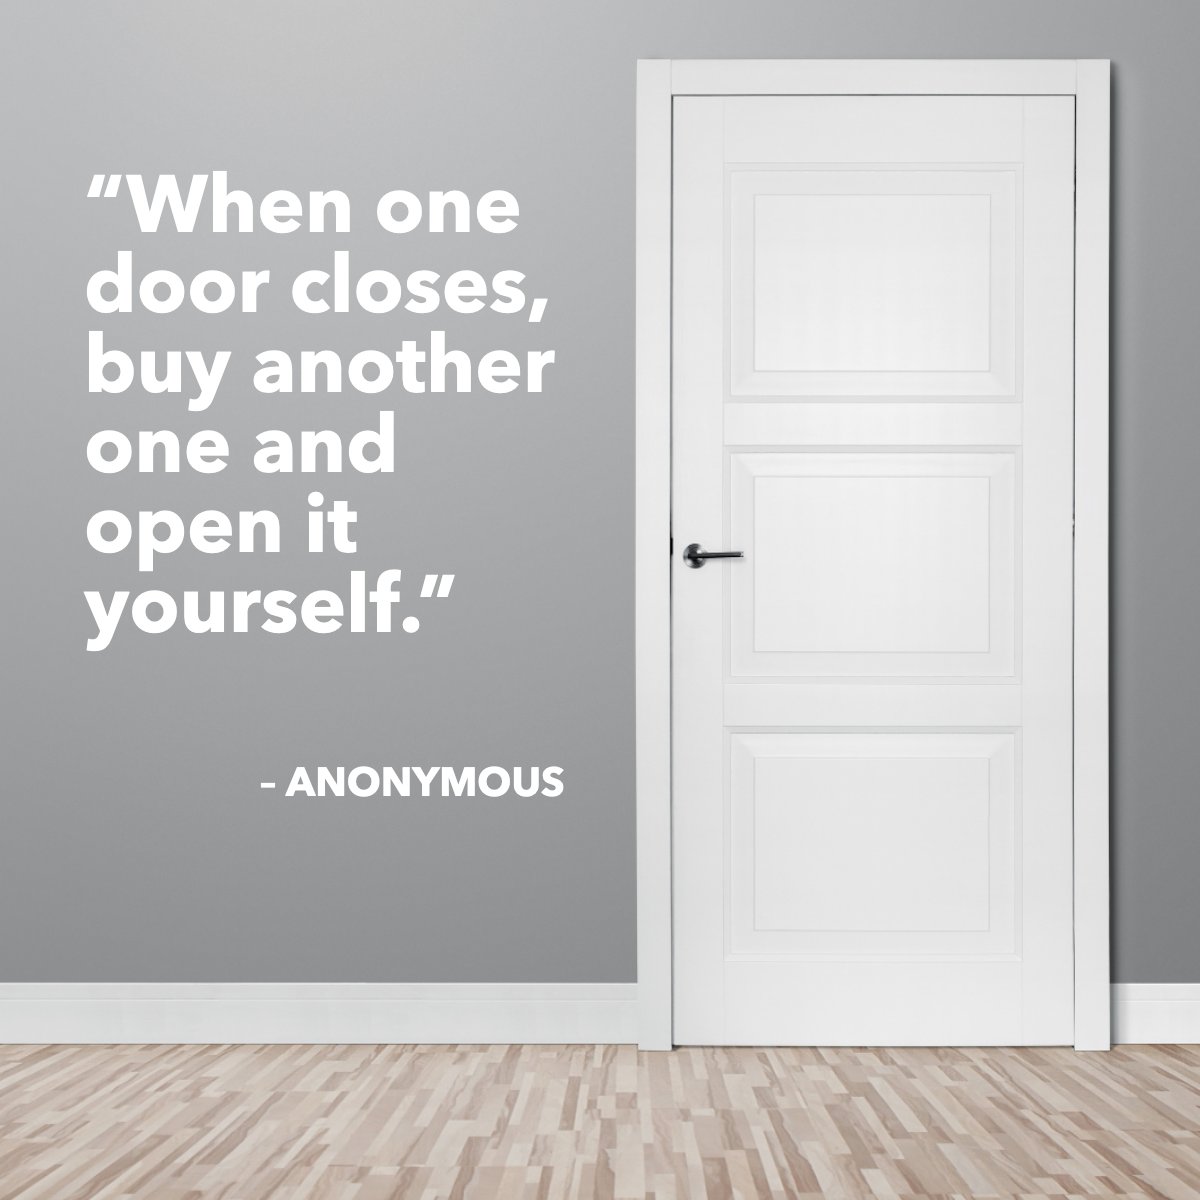 'When one door closes, buy another one and open it yourself.' 
– Anonymous

What doors are you opening up for yourself? Let us know in the comments!

#quote #door #whitedoor #interior #opportunities #opportunity #inspirational